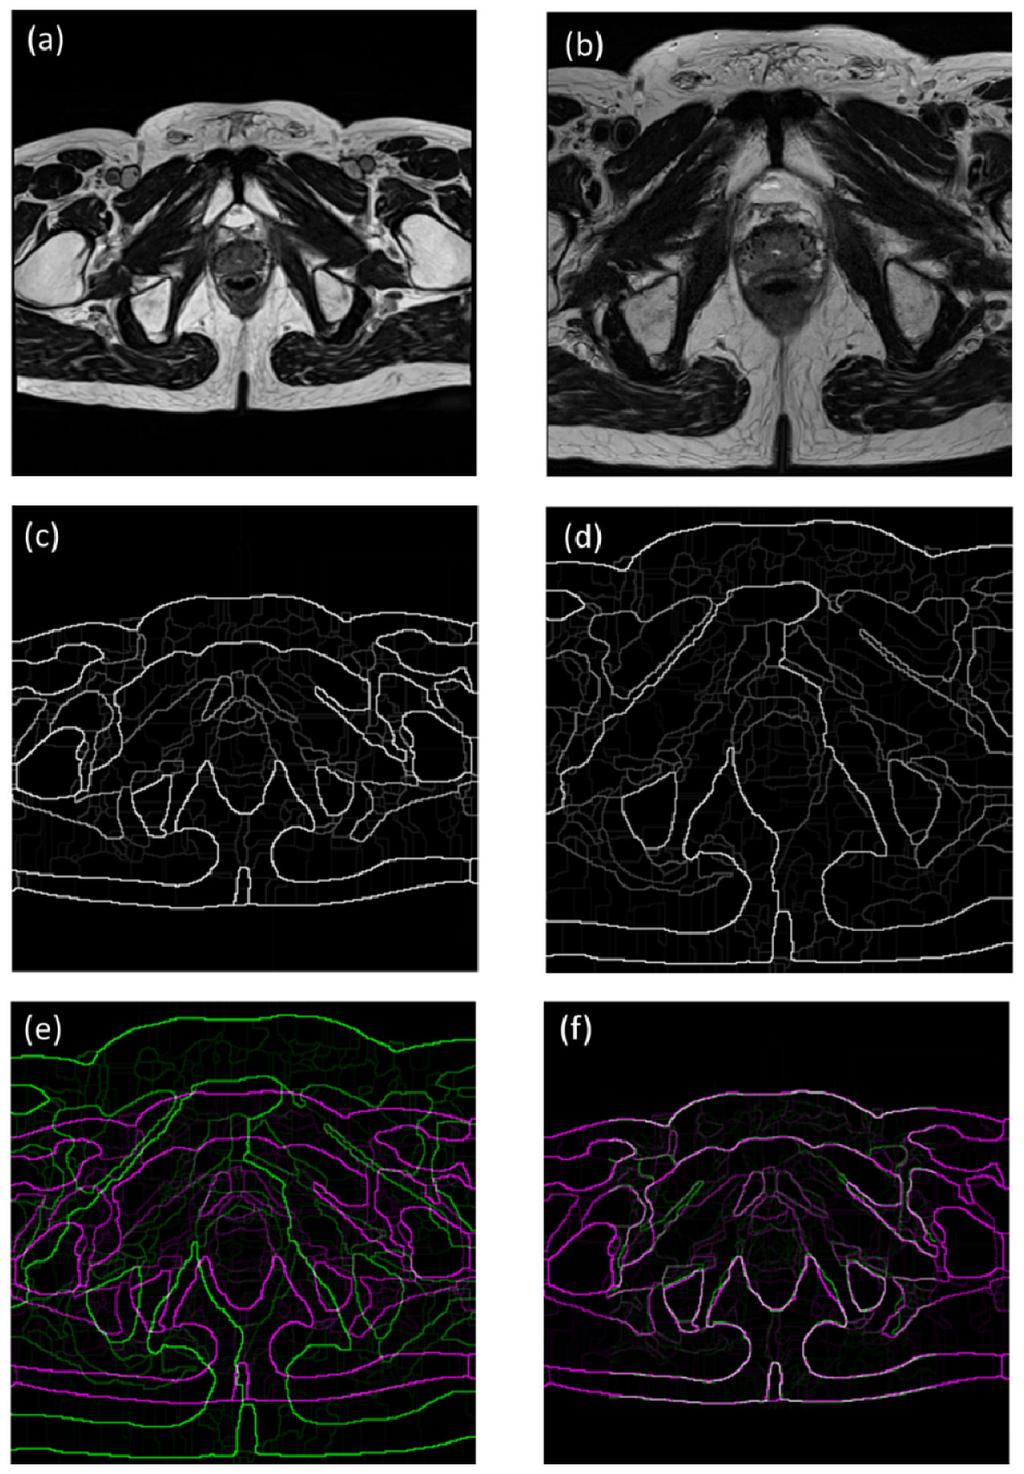 Tian et al. Page 8 Figure 2. The demonstration of the edge maps of MR images. (a) The target image. (b) The atlas image. (c) The edge map of the target image. (d) The edge map of the atlas image.